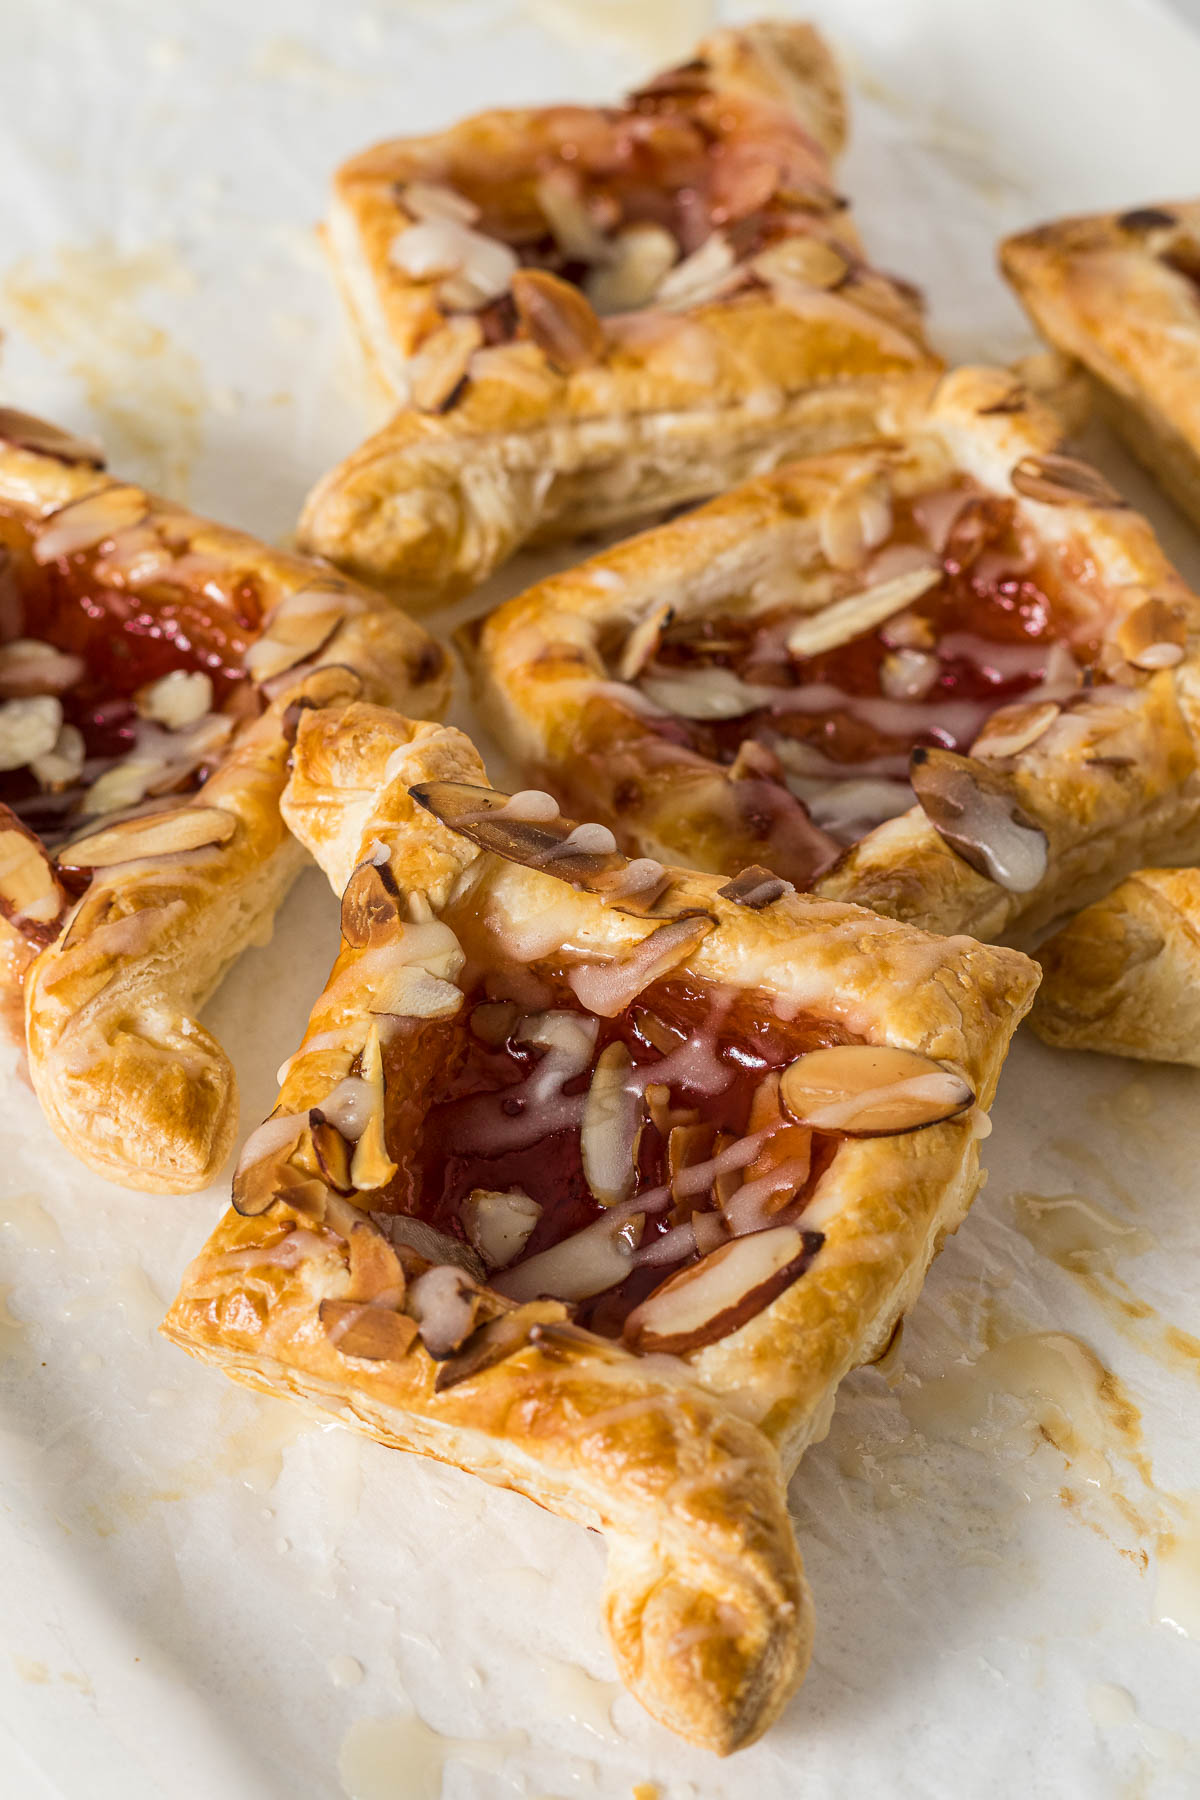 Baked jam puff pastry tarts topped with glaze.